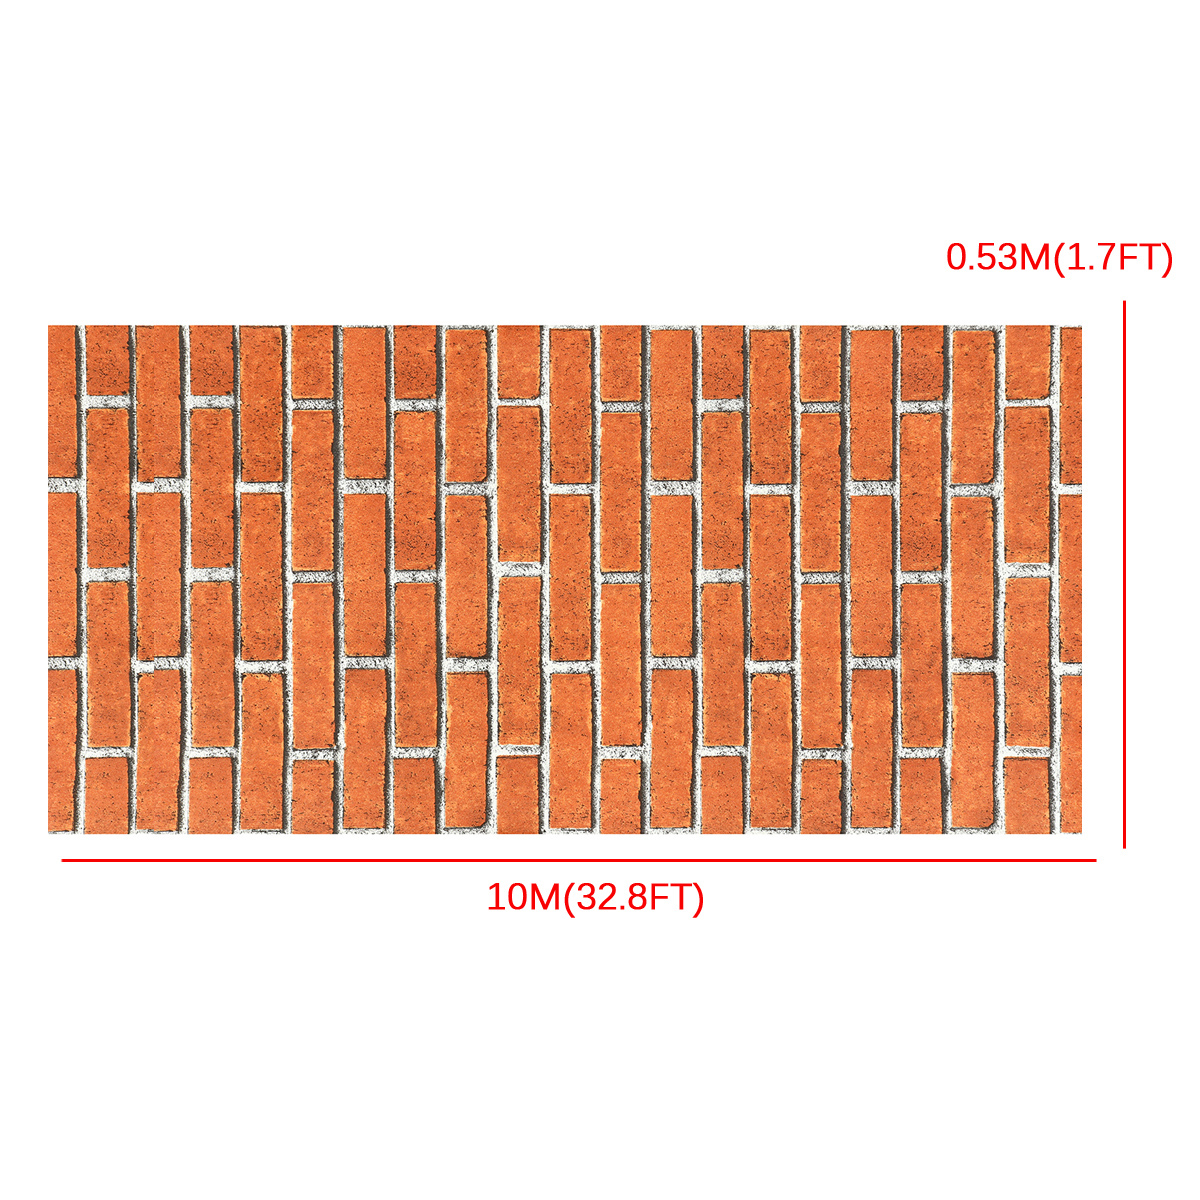 393.7x19.7in Non-Woven Wallpaper, 3D Effect Brick Wall Panel(No Glue) - image 5 of 9